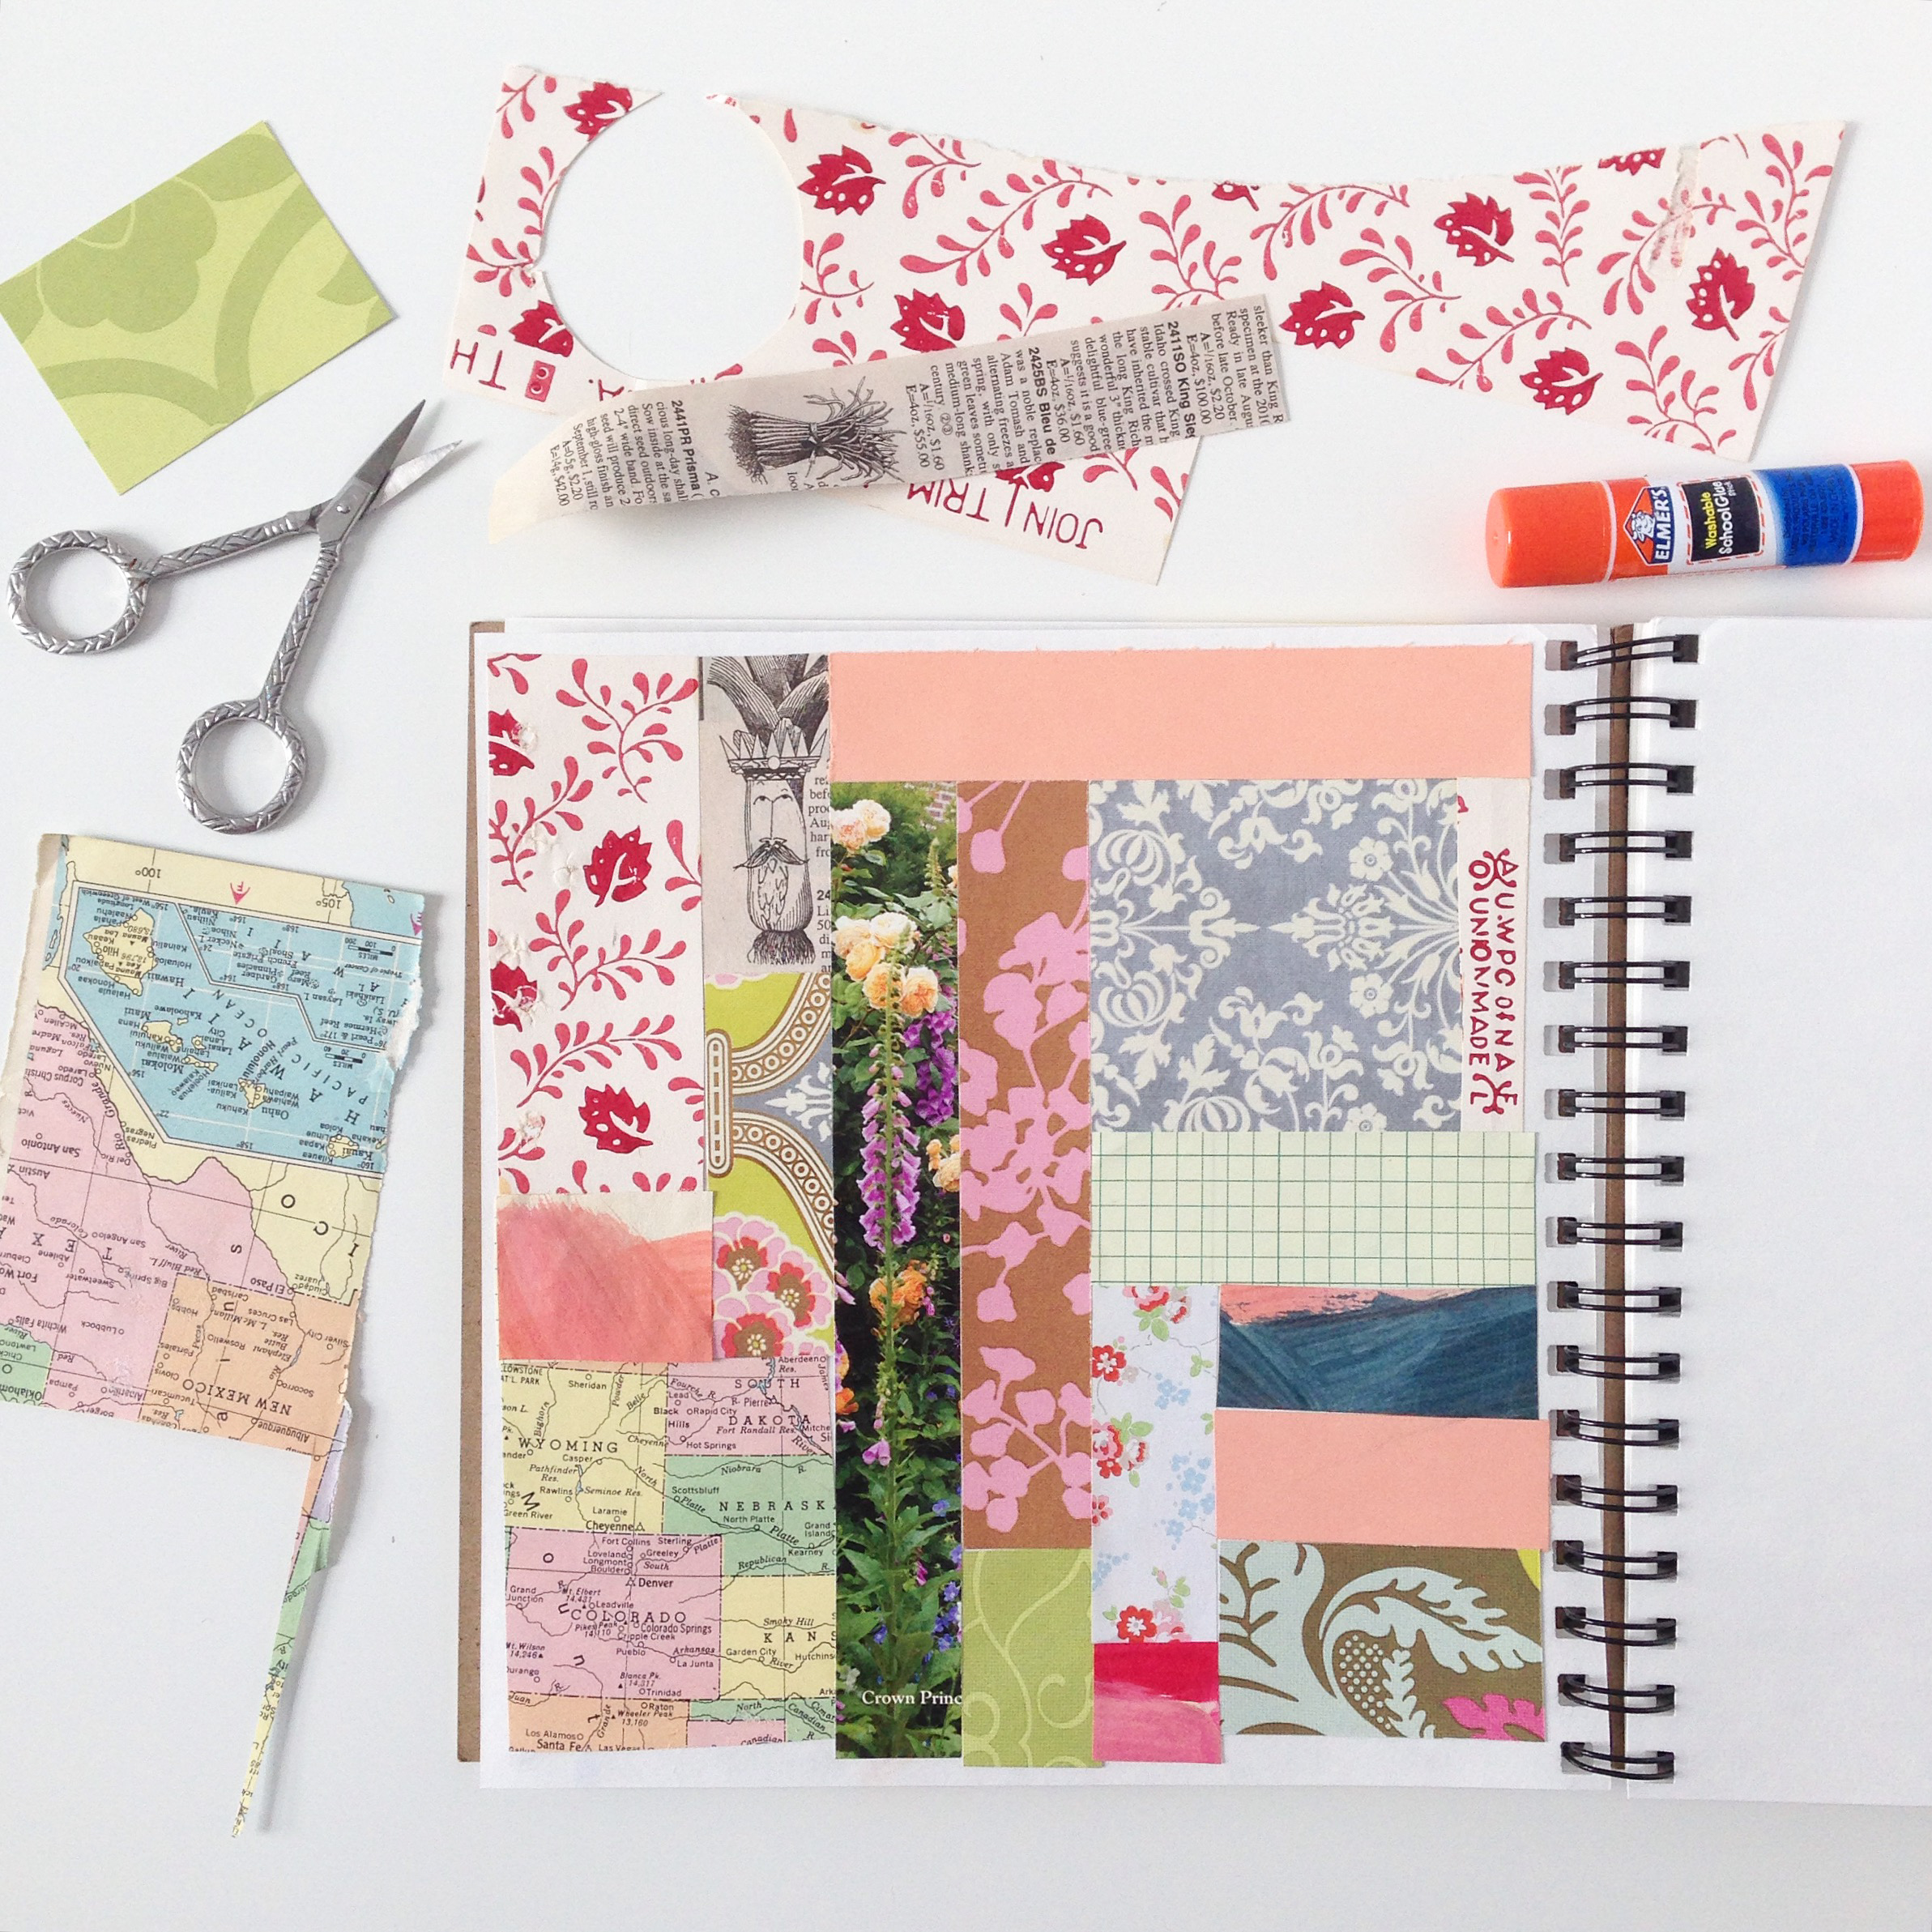 Patchwork Collage in Anne Butera's Sketchbook